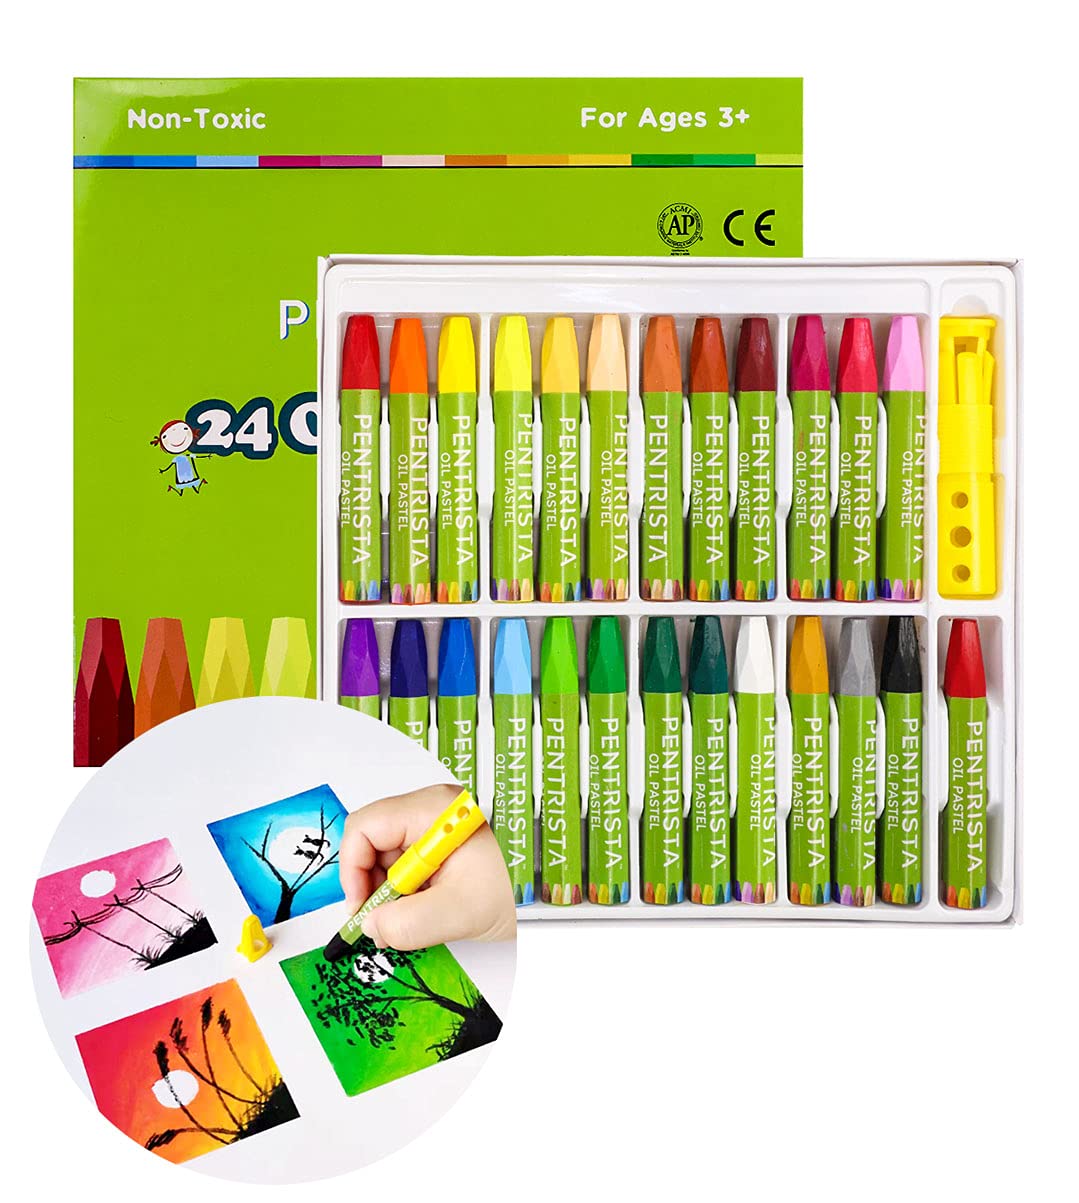  Bright Ideas Regular Oil Pastels - 12 Pack of Assorted Colours  Oil Pastels Crayons - Intense Bright Colours - Perfect Oil Pastels for Kids,  Artists, Students - Pastels for Paper